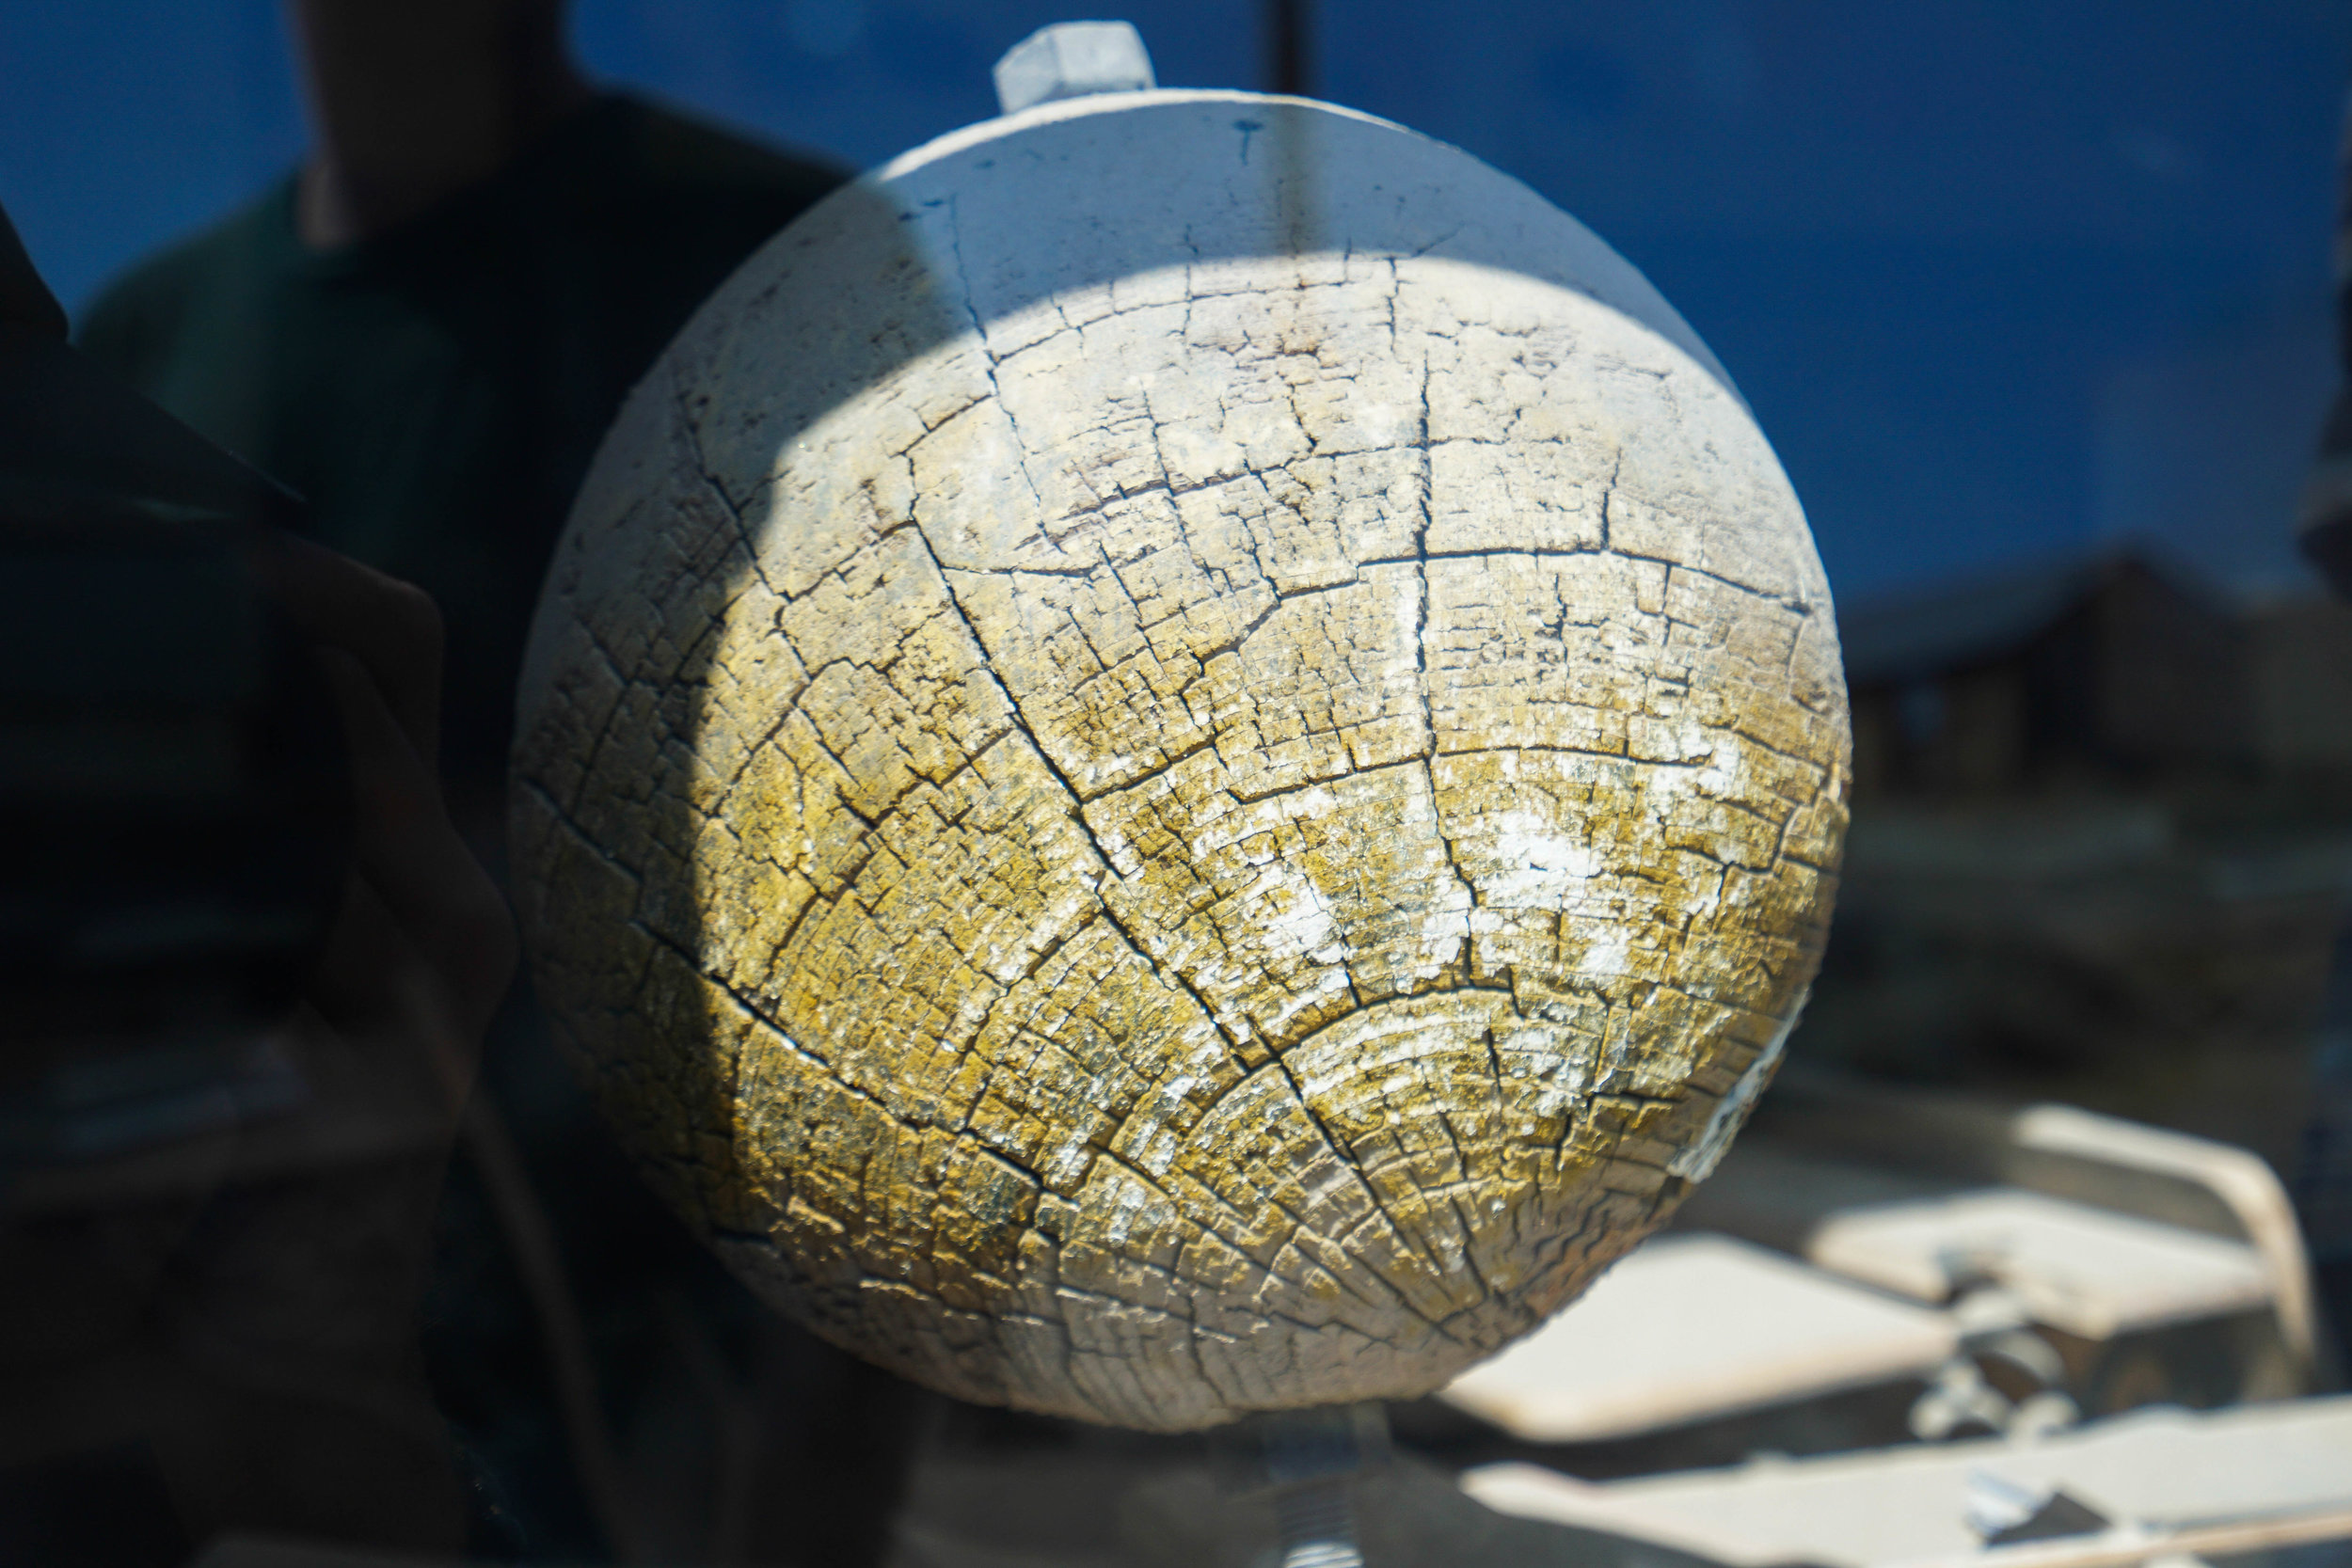 What's left of a globe map.